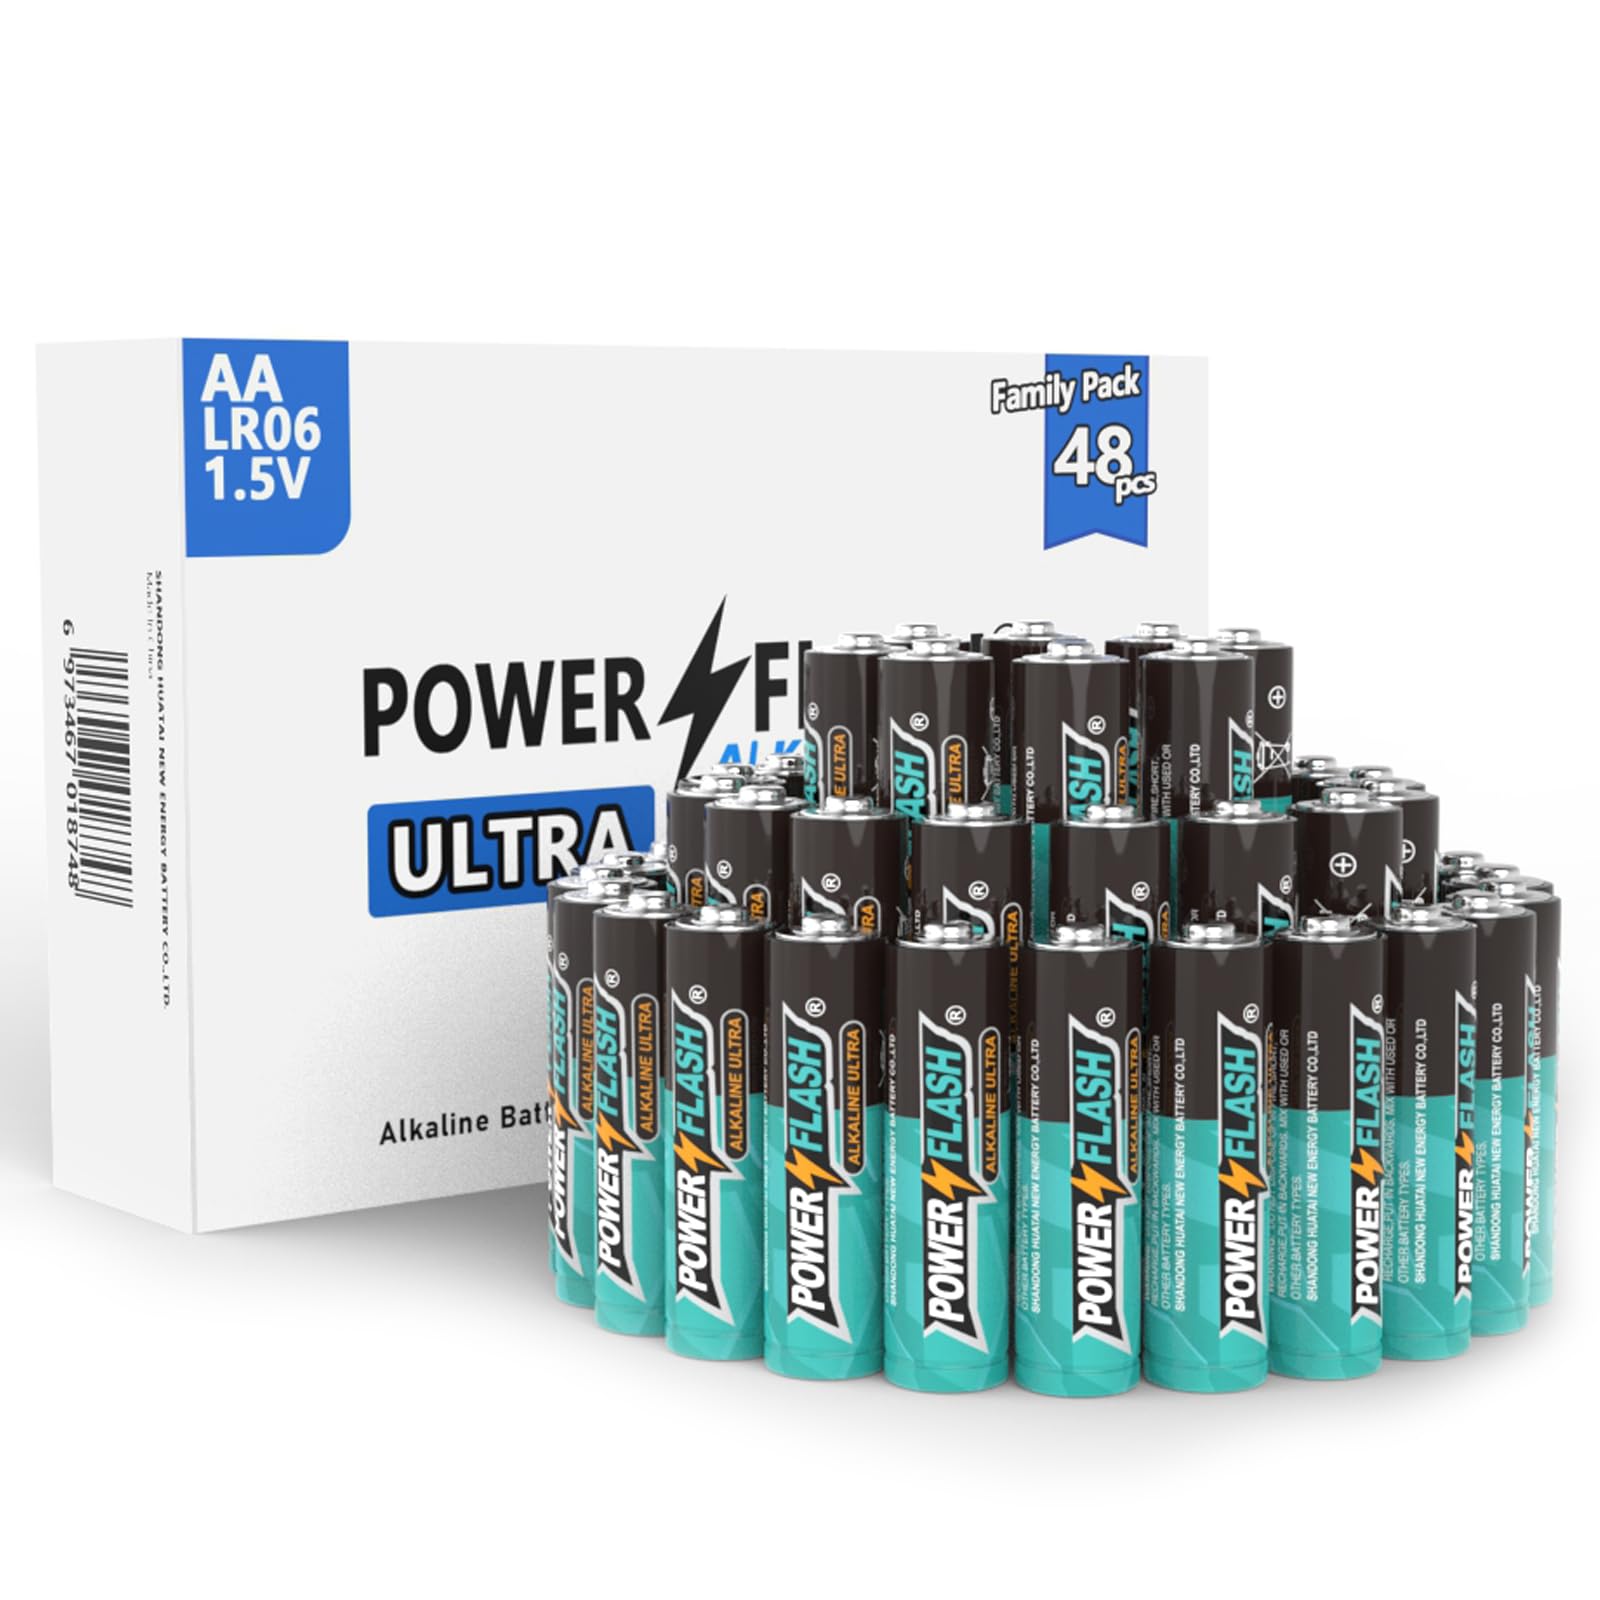 POWER FLASH 48 AA Batteries, Batteries Provide Long Lasting Power, 10 Year Battery Warranty, Alkaline AA Batteries for Home and Office Equipment (48 Count Pack) - $13.82